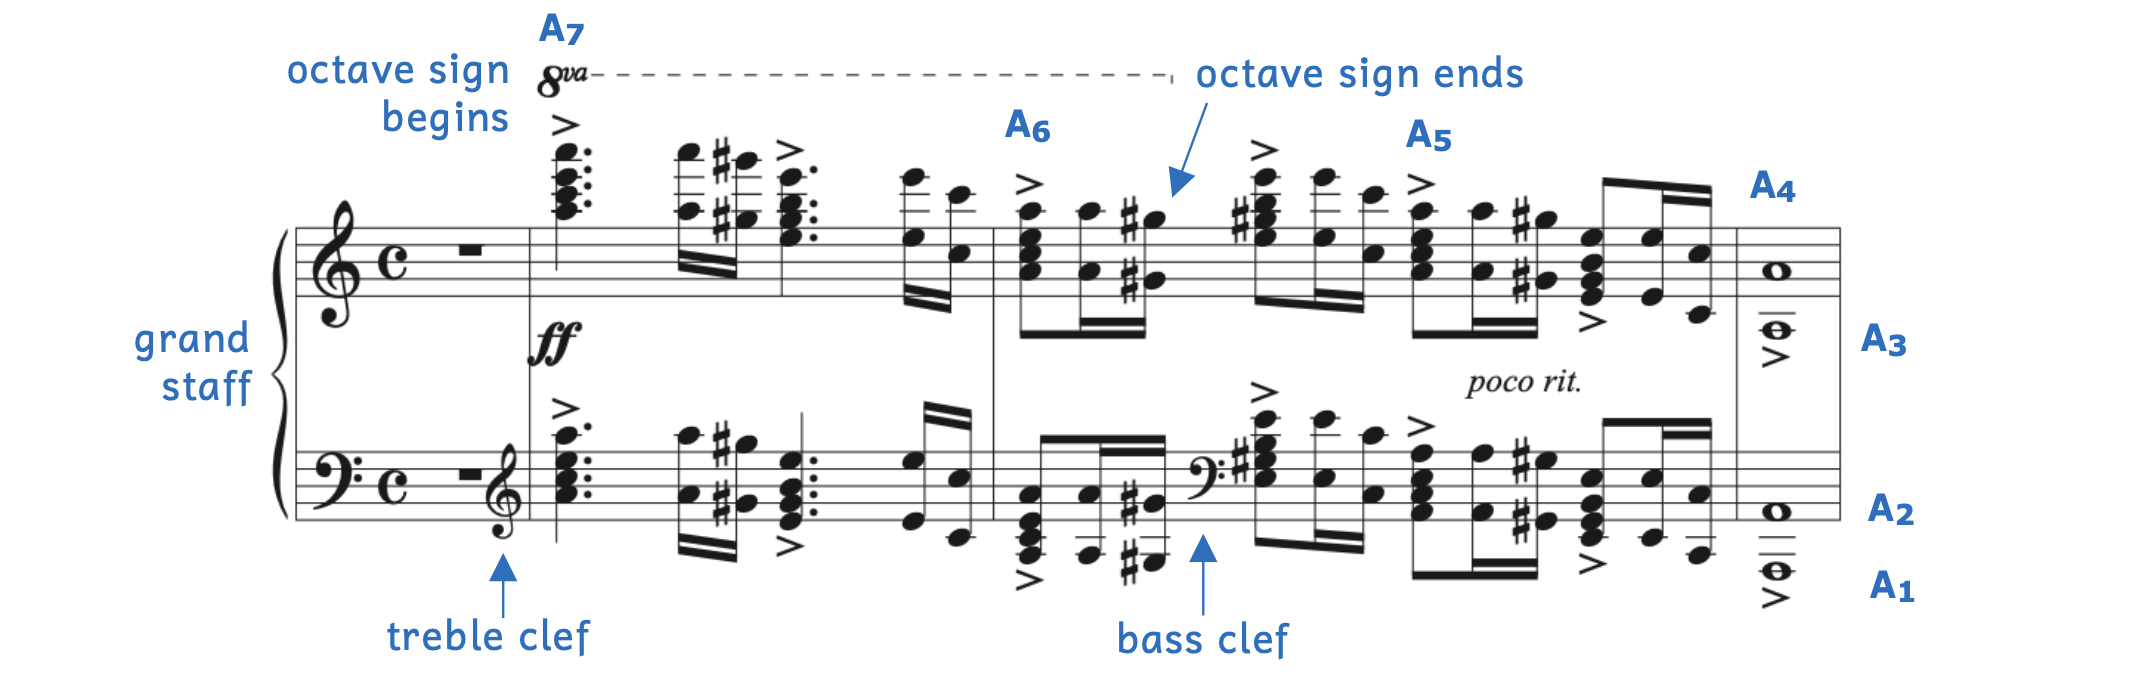 Opening of Grieg's Piano Concerto. There are a number of terms introduced in this section and chapter, including the grand staff and the octave sign above the treble clef. The octave sign makes the first highest note in the treble clef A7 and the octave sign continues for over a measure. The bottom part of the grand staff begins with the bass clef but soon changes to the treble clef. The bass clef returns halfway in the next measure. This examples shows seven octaves of A's: A7, A6, A5, A4, A3, A2, and A1.